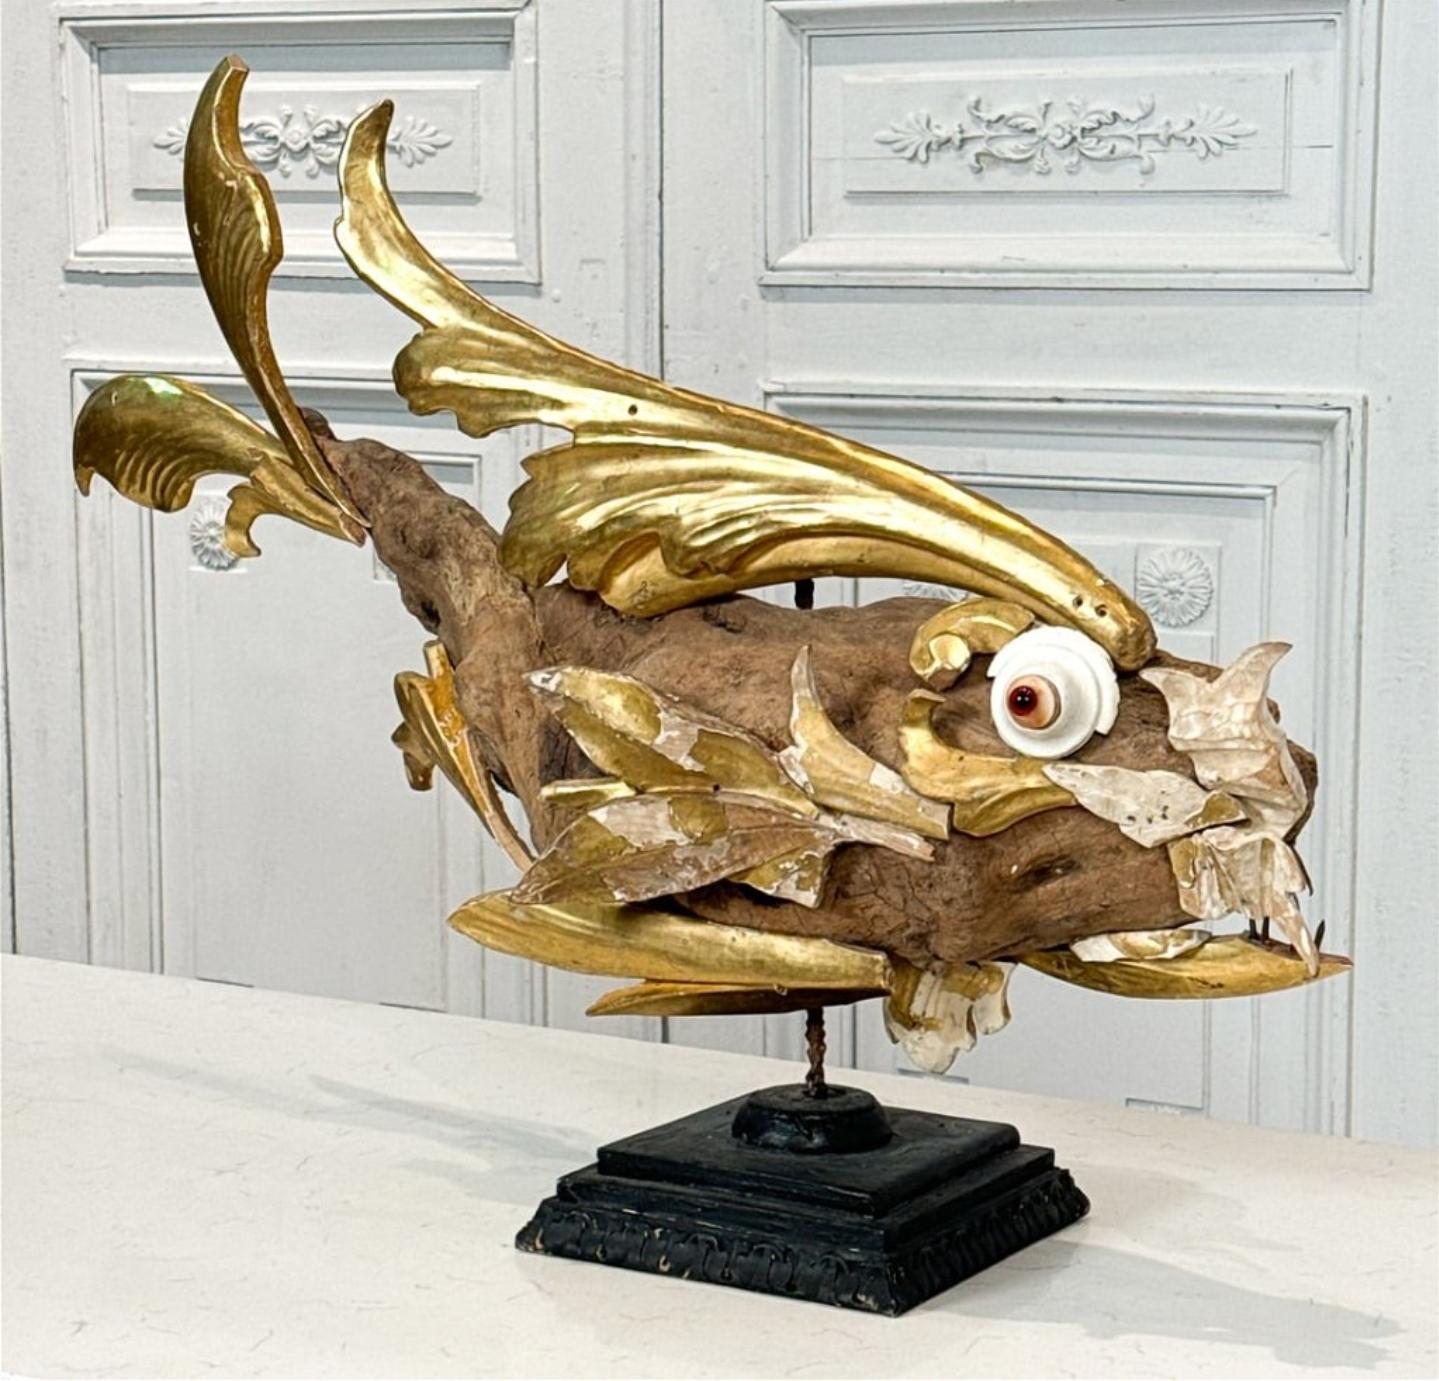 Italian Folk Art Fish Sculpture from 18th/19th Century Fragments Found Objects In Good Condition For Sale In Forney, TX